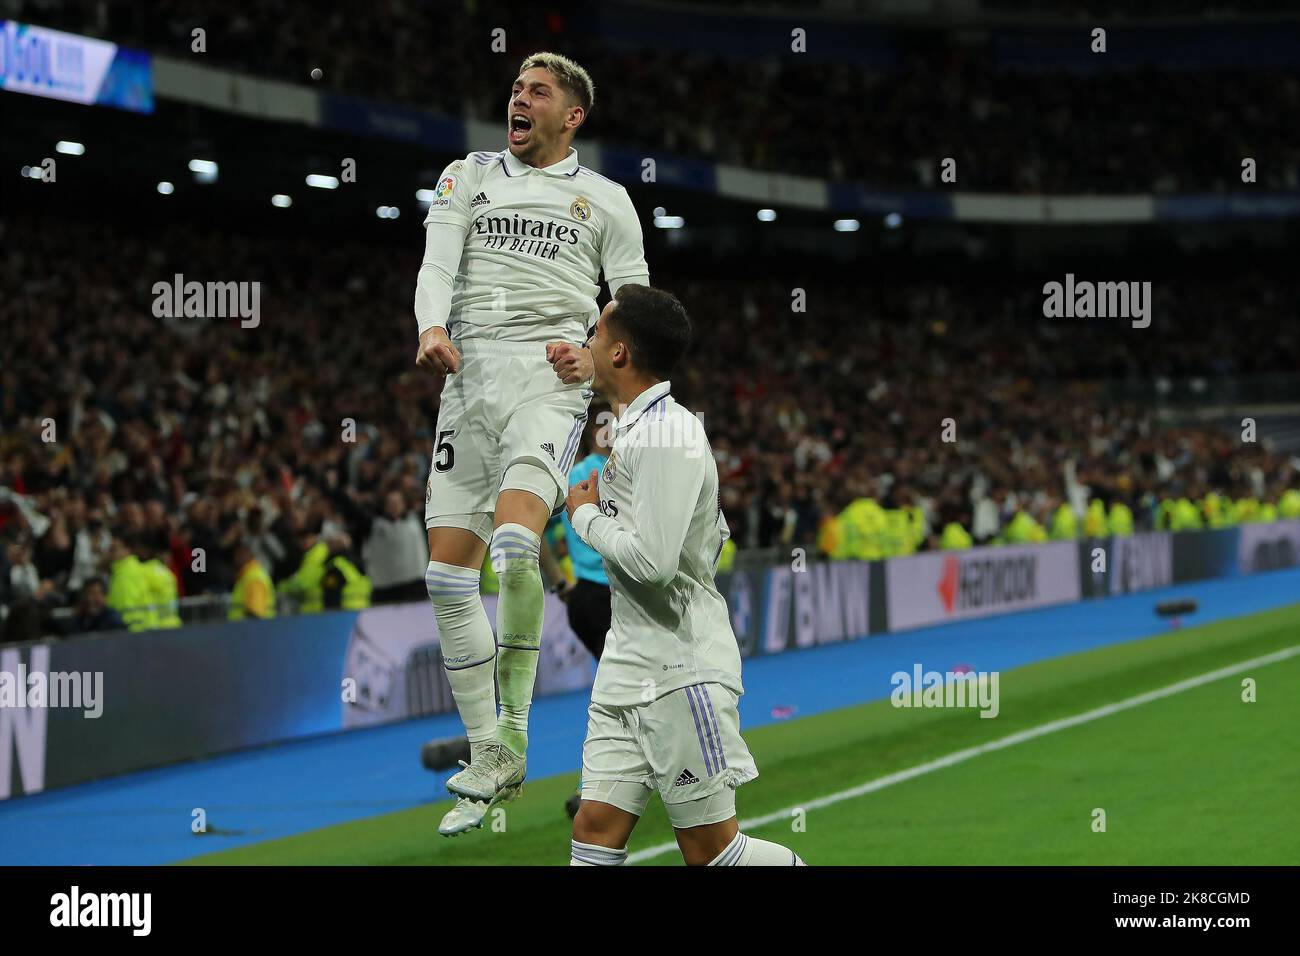 Madrid, Spain, on October 22, 2022. Real Madrid´s Federico Valverde celebrates during La Liga Match Day 11 between Real Madrid C.F. and Sevilla C.F. at Santiago Bernabeu Stadium in Madrid, Spain, on October 22, 2022. Credit: Edward F. Peters/Alamy Live News Stock Photo